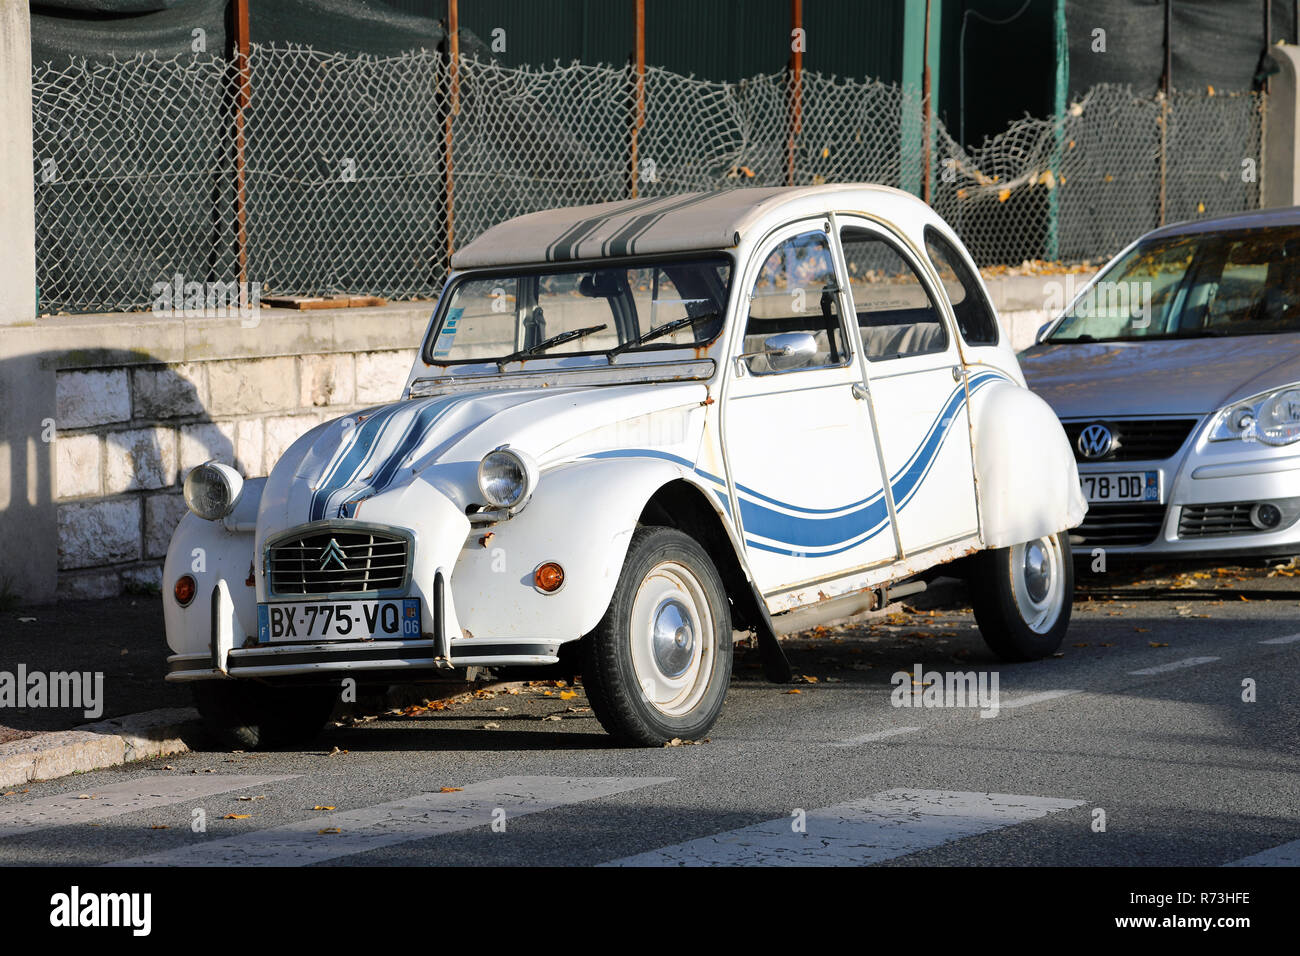 Roquebrune-Cap-Martin, France - December 4, 2018: White And Blue Striped Old Car Citroen 2 CV Parked On The Street, French Riviera, France, Europe, Cl Stock Photo